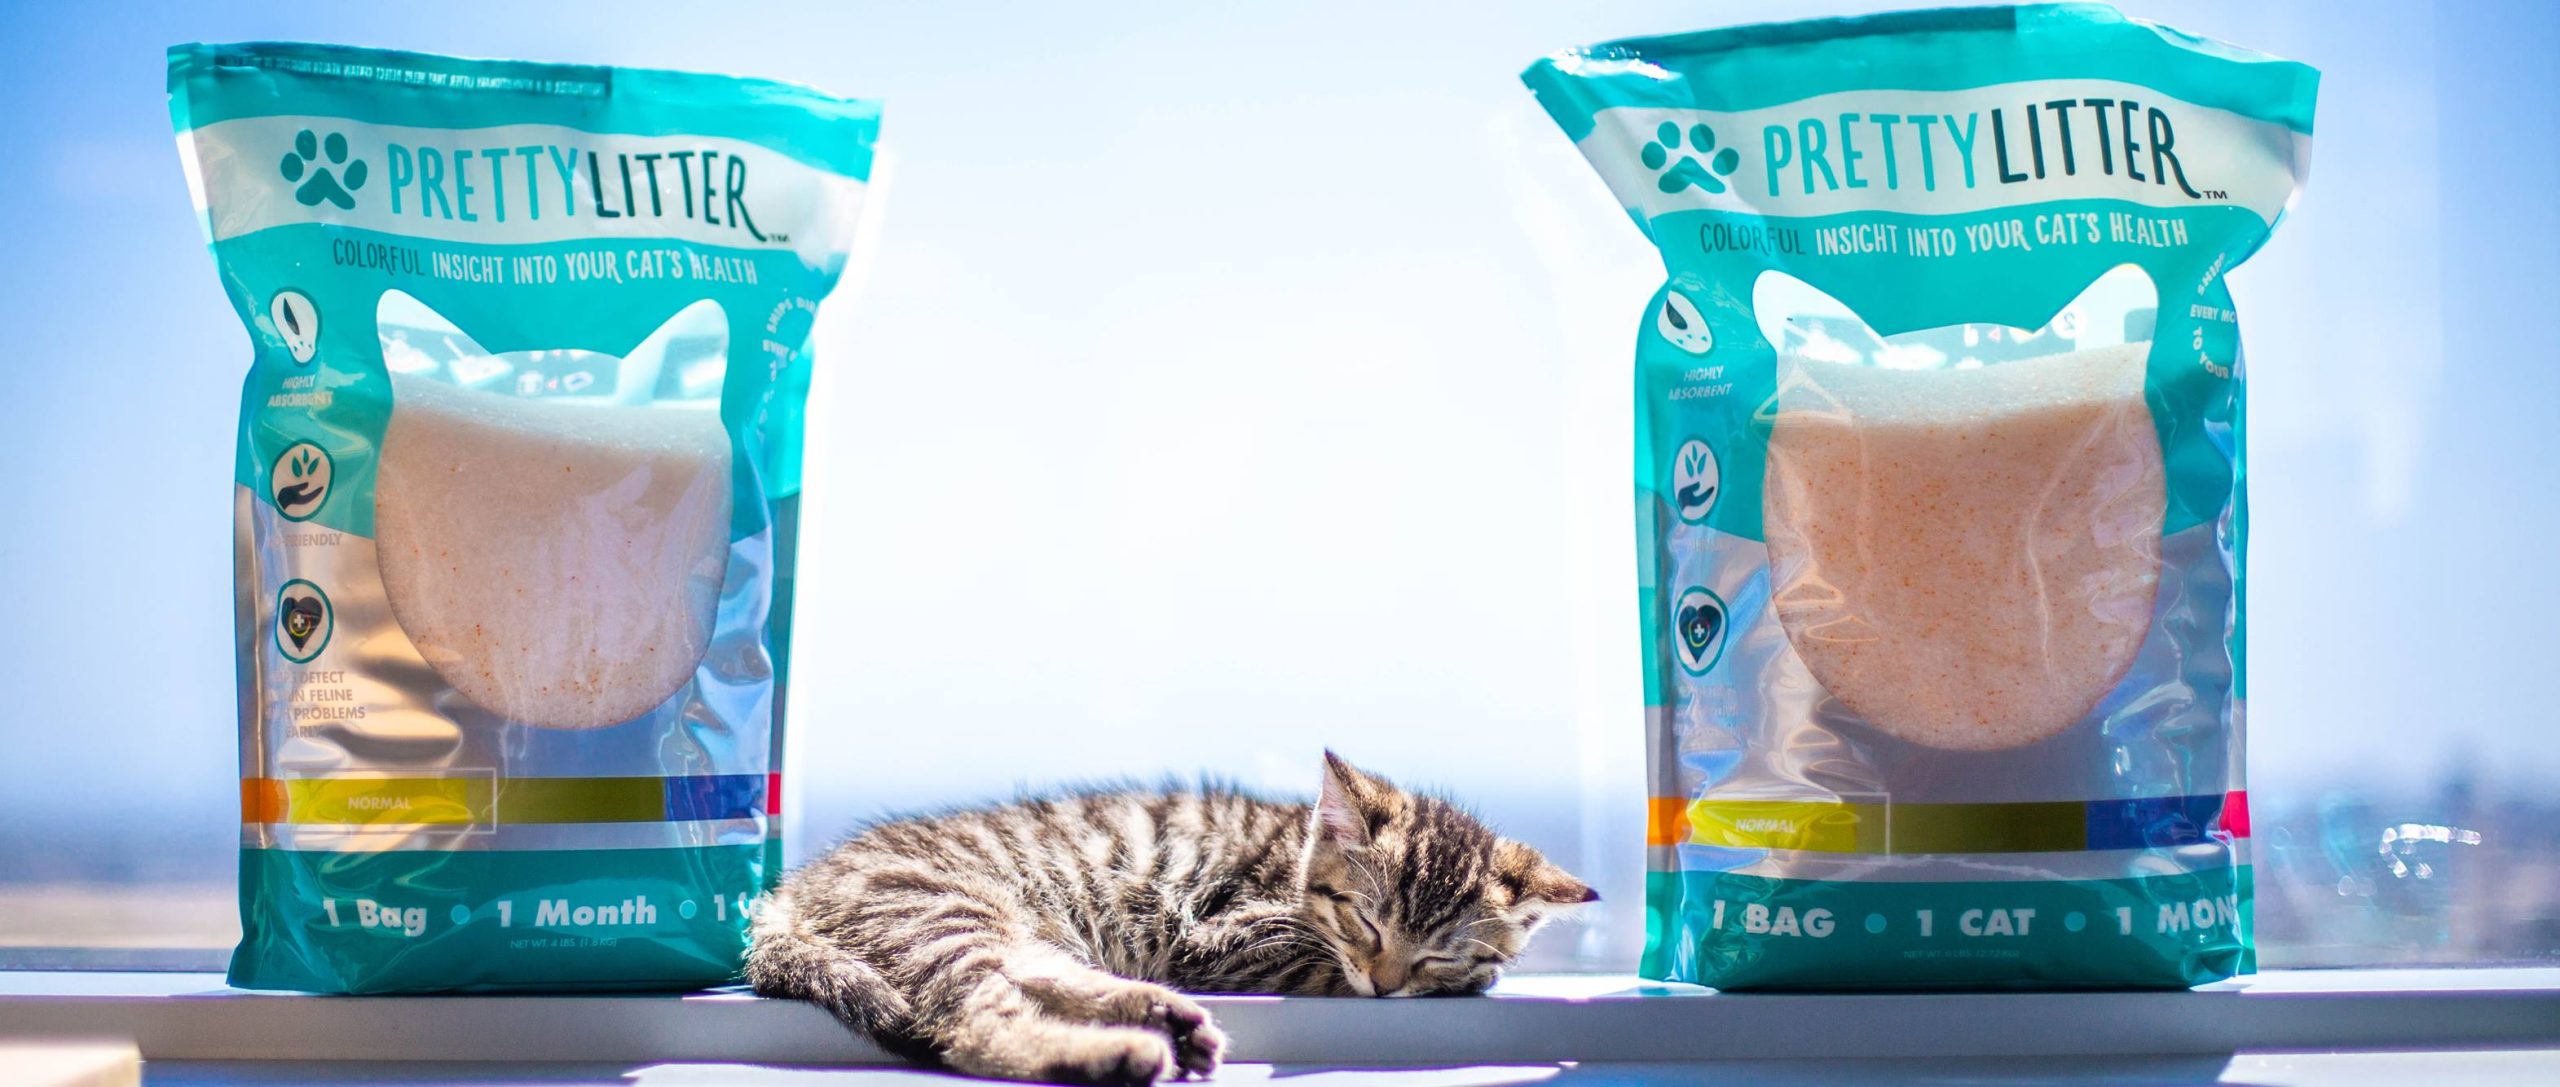 1-Month Supply of PrettyLitter: The Next Evolution In Cat Litter Giveaway